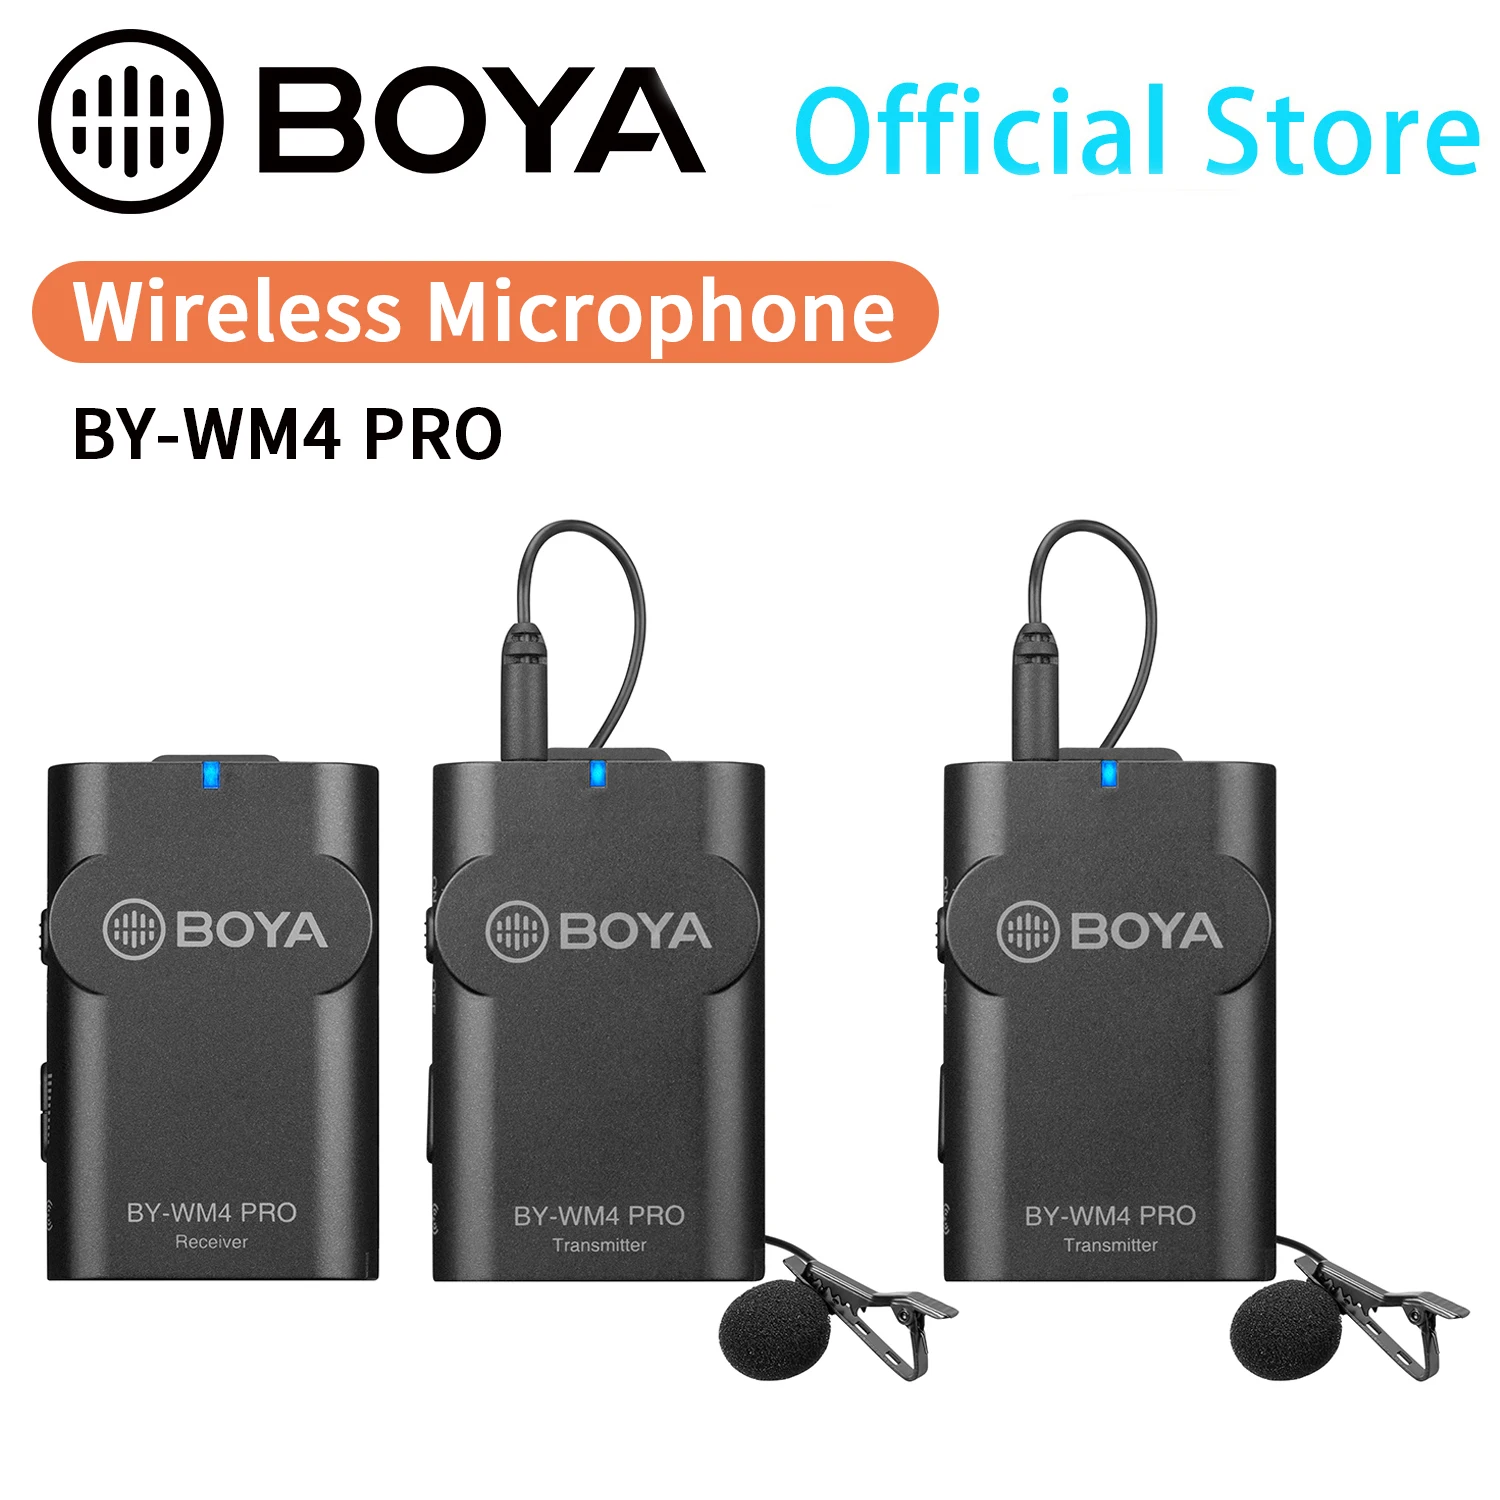 Enlarge BOYA BY-WM4 PRO 2.4GHz Condenser Wireless Lavalier Lapel Microphone for PC iPhone Android Smartphone Xiaomi Huawei DSLRs Cameras